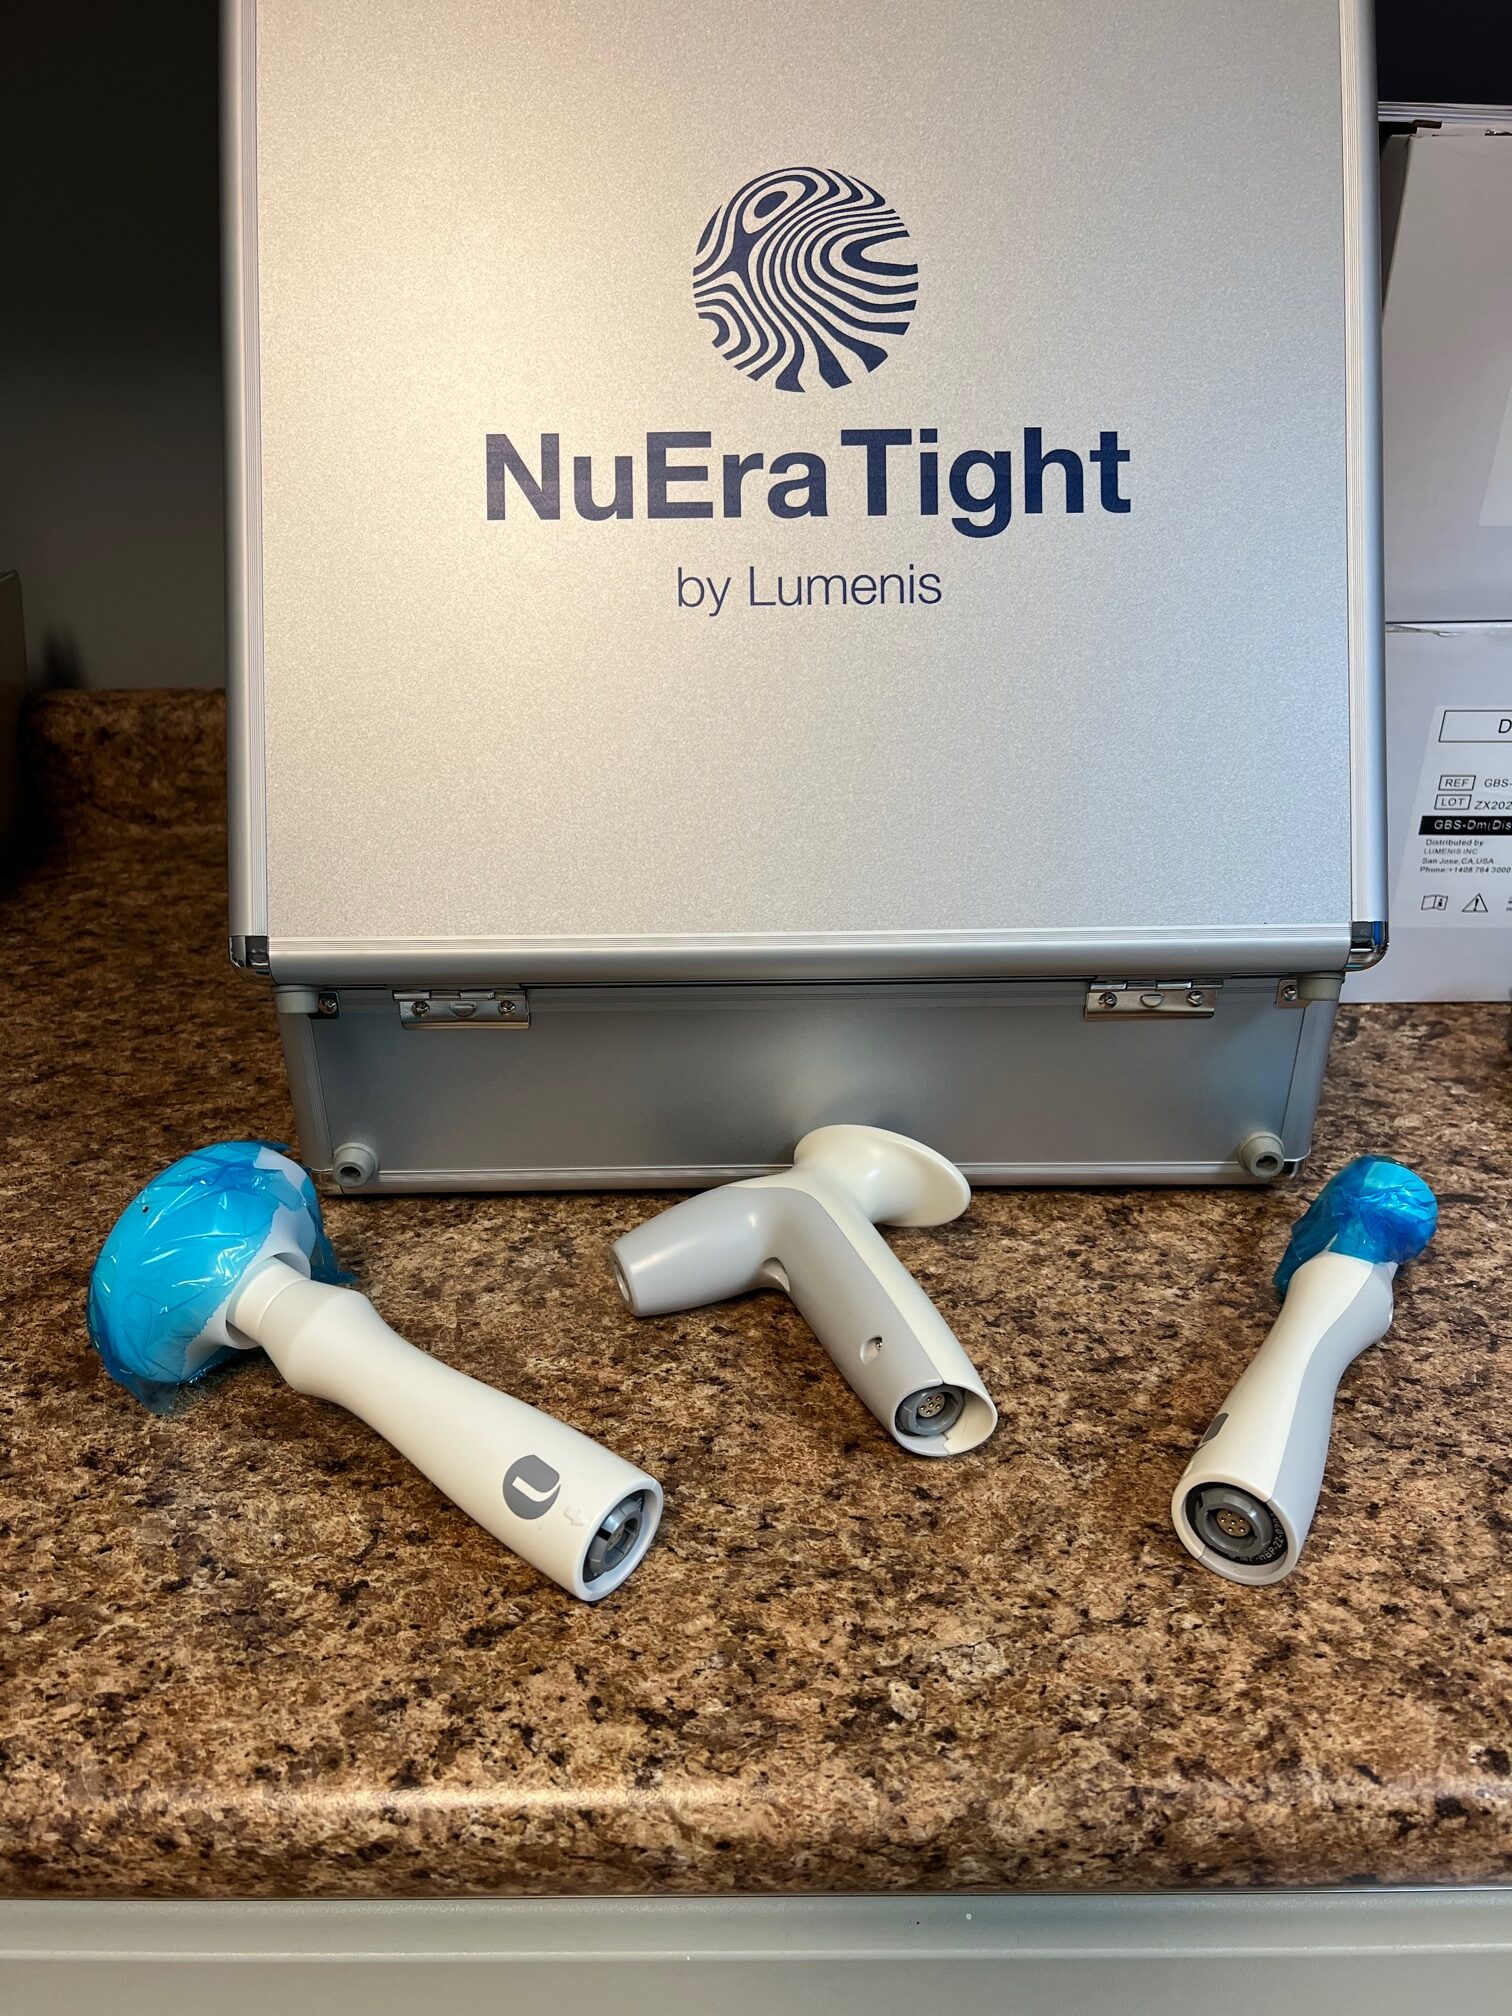 2022 Lumenis NuEra Tight 1.2 - New, Never Used - Radio Frequency Skin  Tightening, Winkle Reduction, Cellulite Reduction, & Fat Reduction -  Includes Warranty & Free Shipping(zh/bia)s - Rock Bottom Lasers